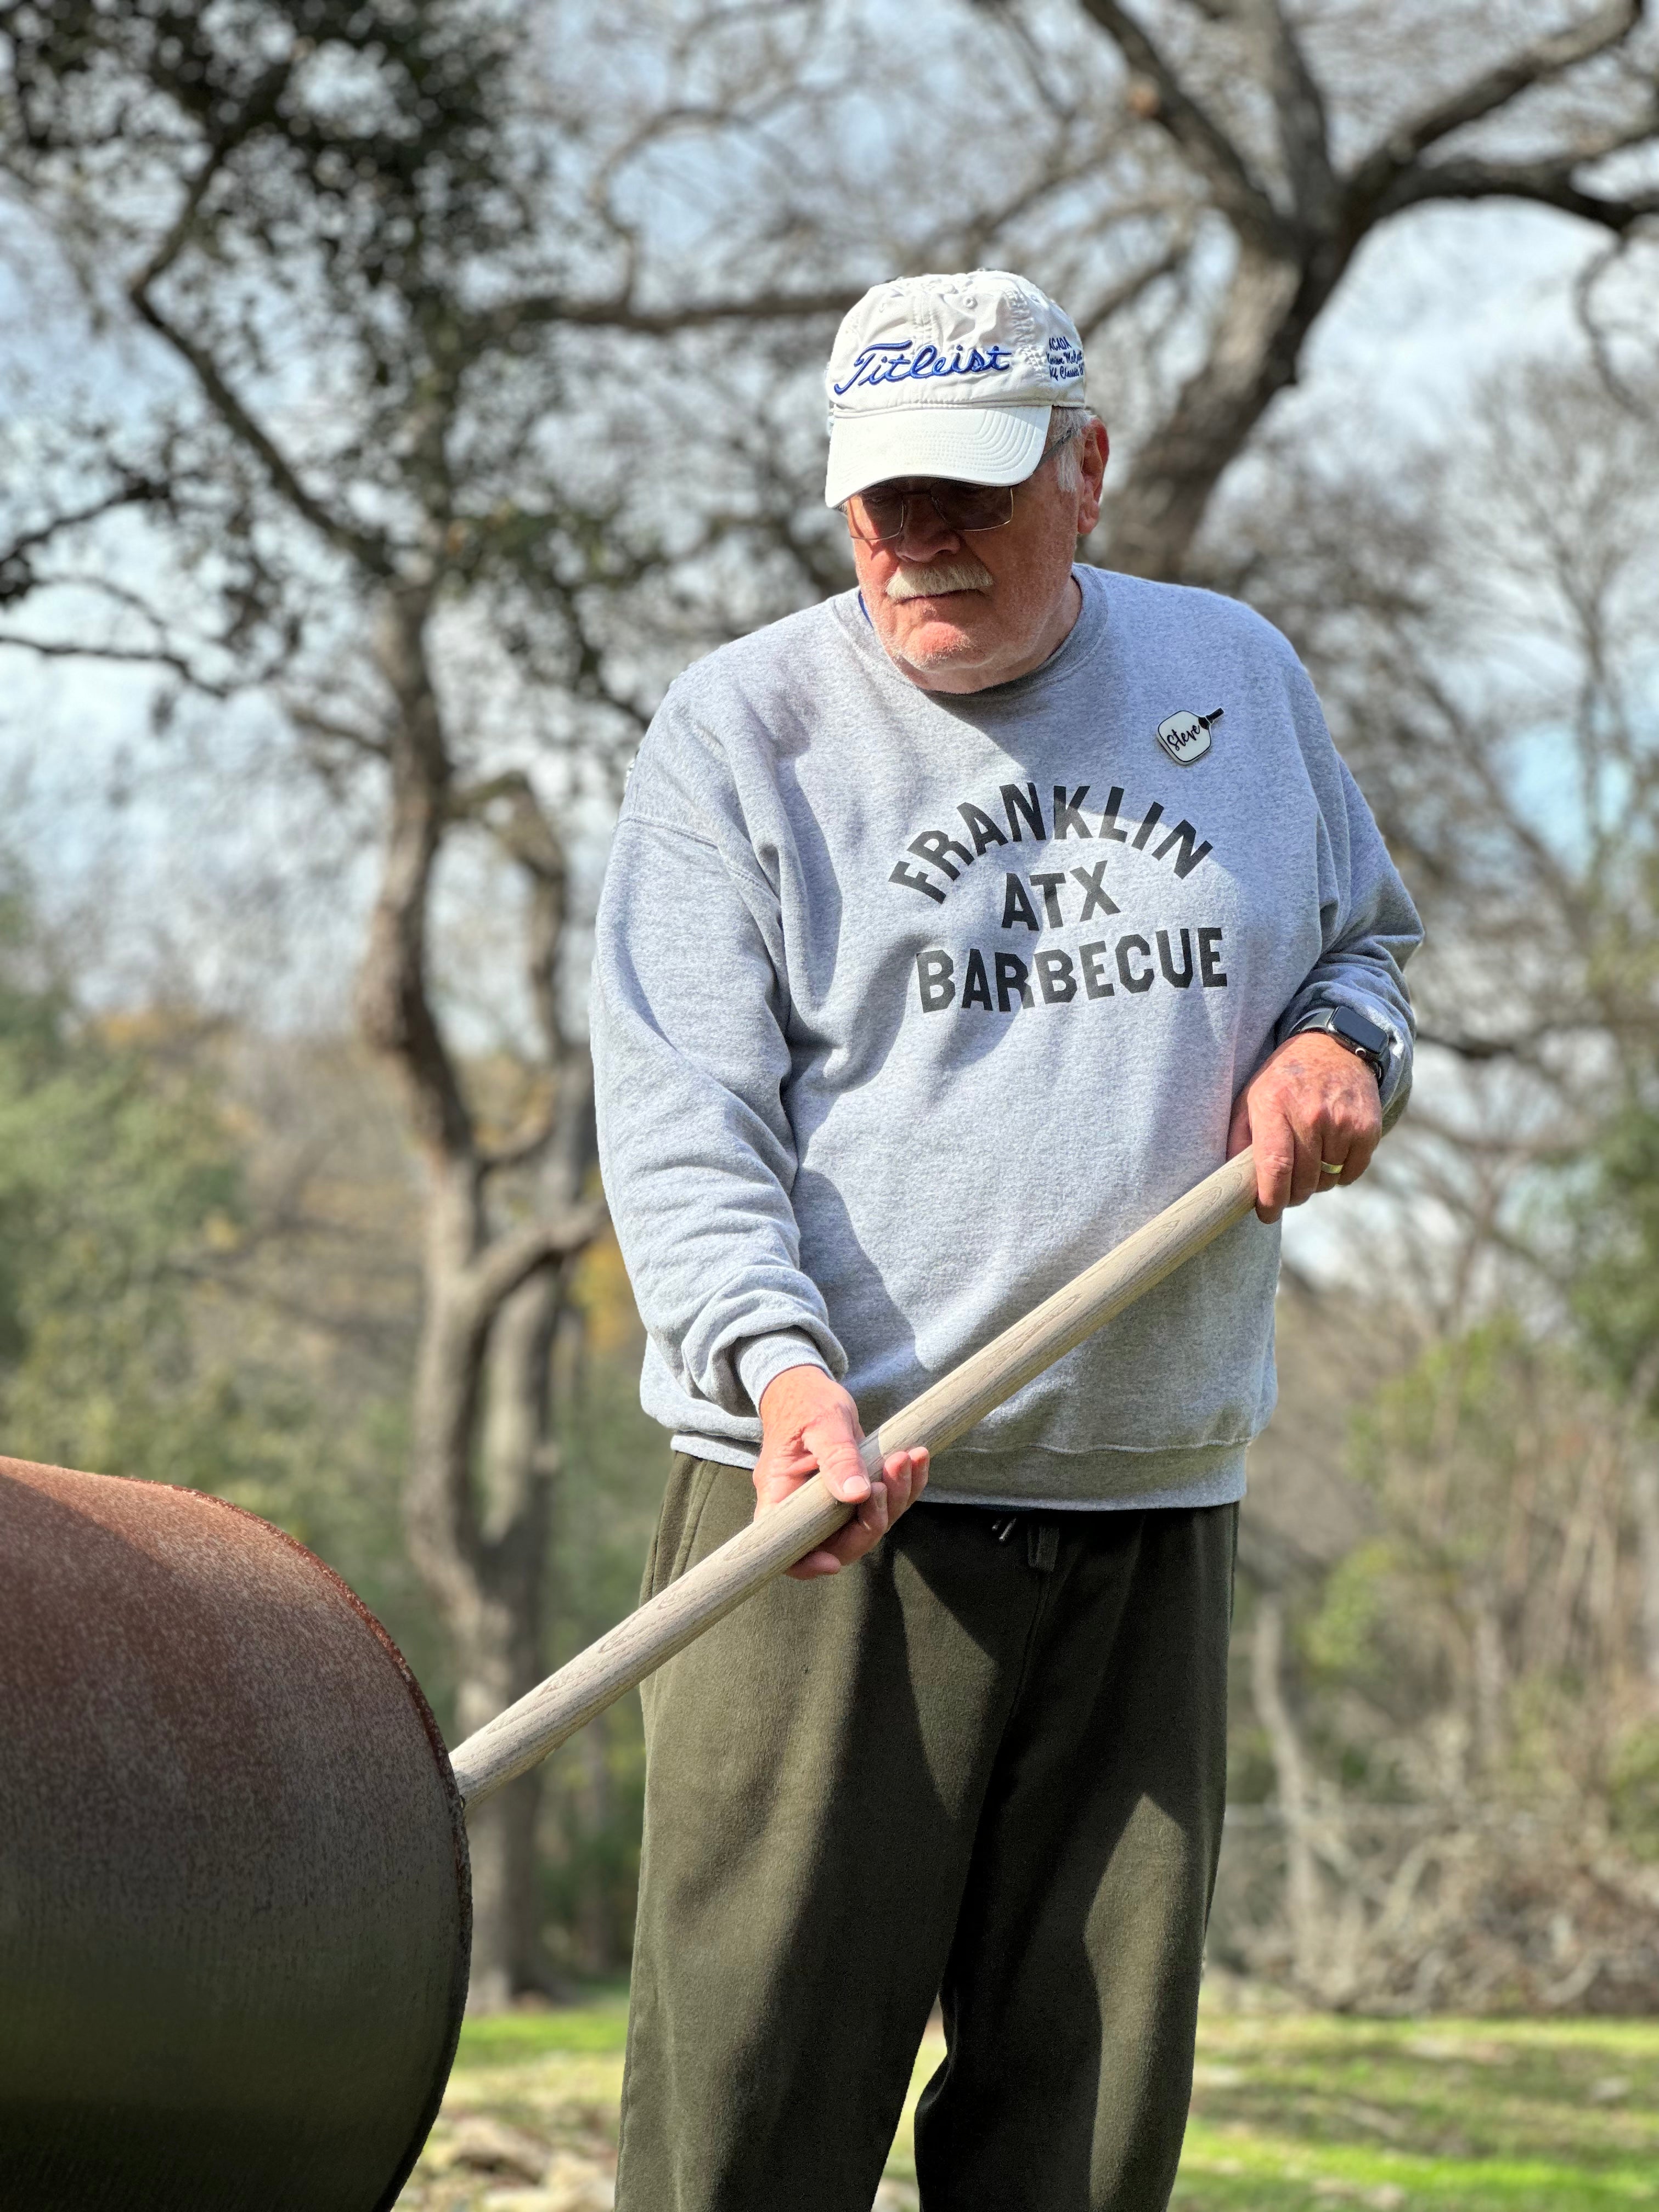 A 71 year old gentlemen is outside and is poking a large wooden stick into a smoker. He wears the grey Franklin ATX Barbecue sweatshirt. He looks calm and comfortable.